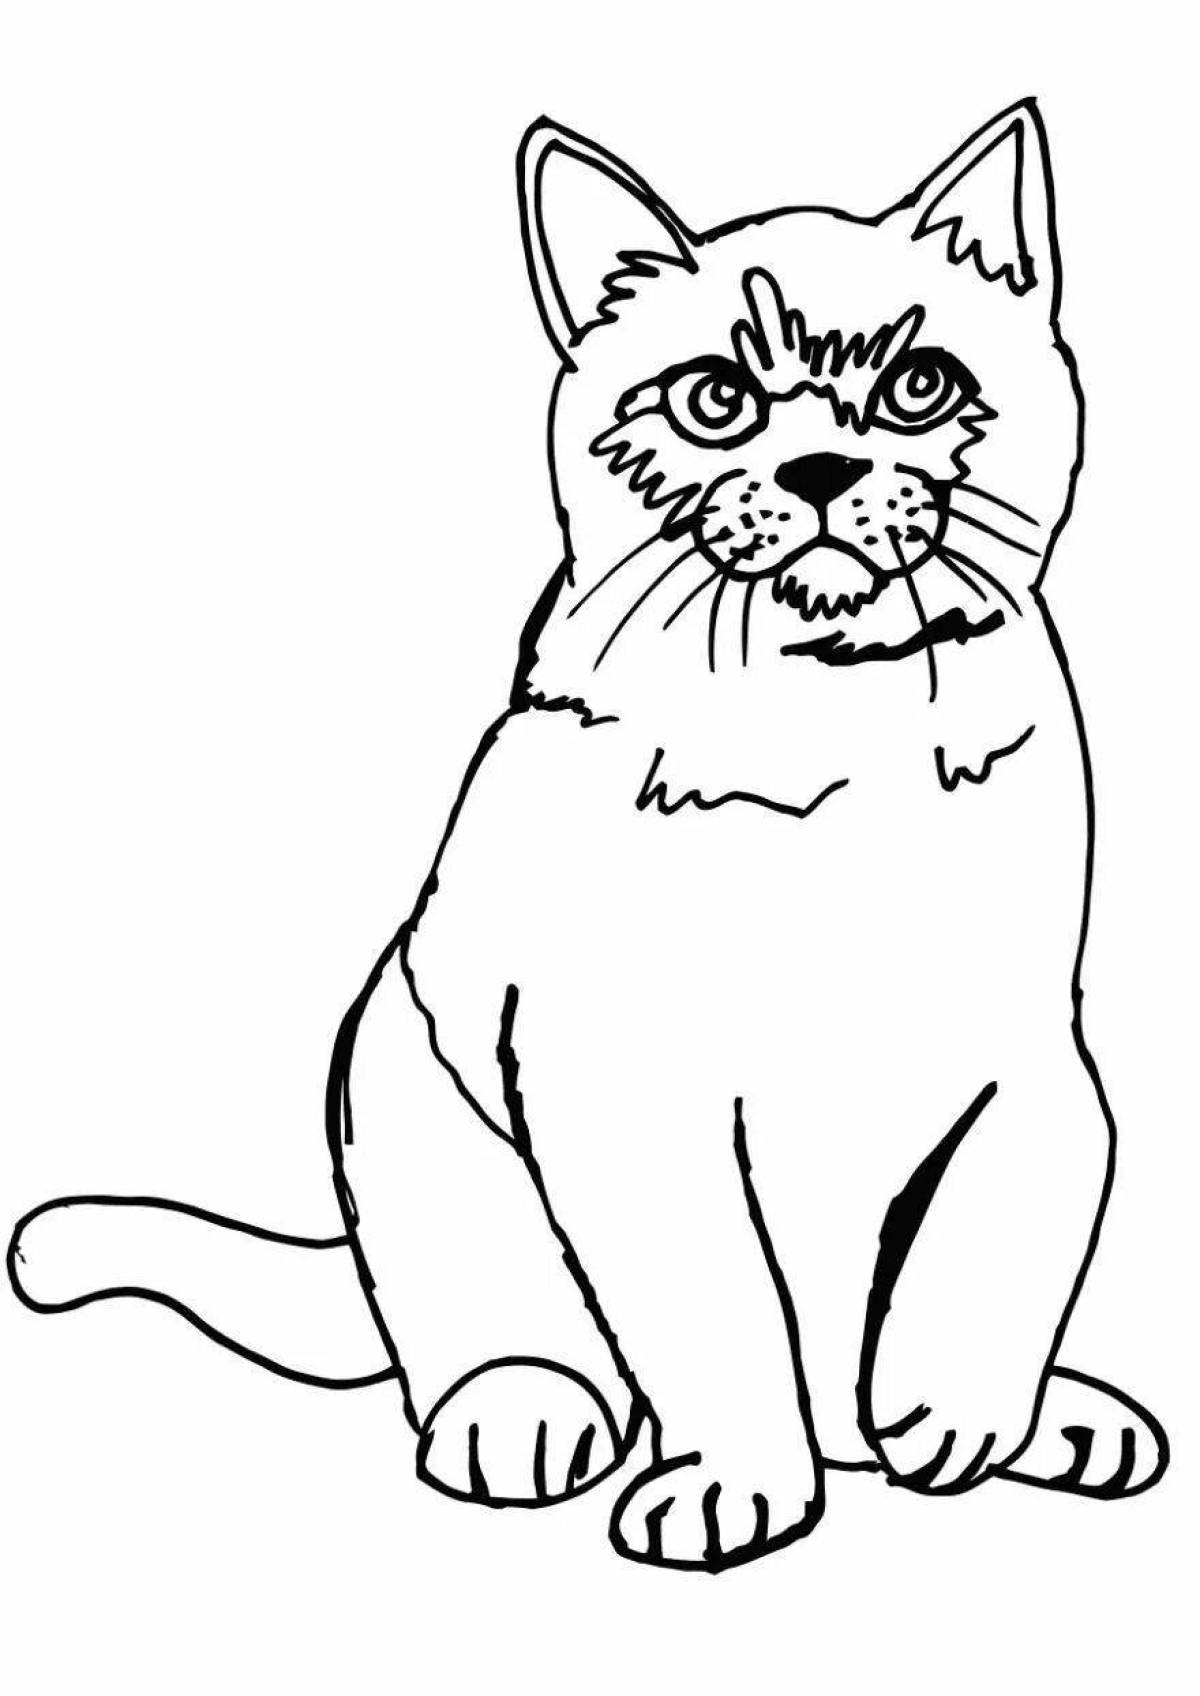 Coloring page graceful white cat